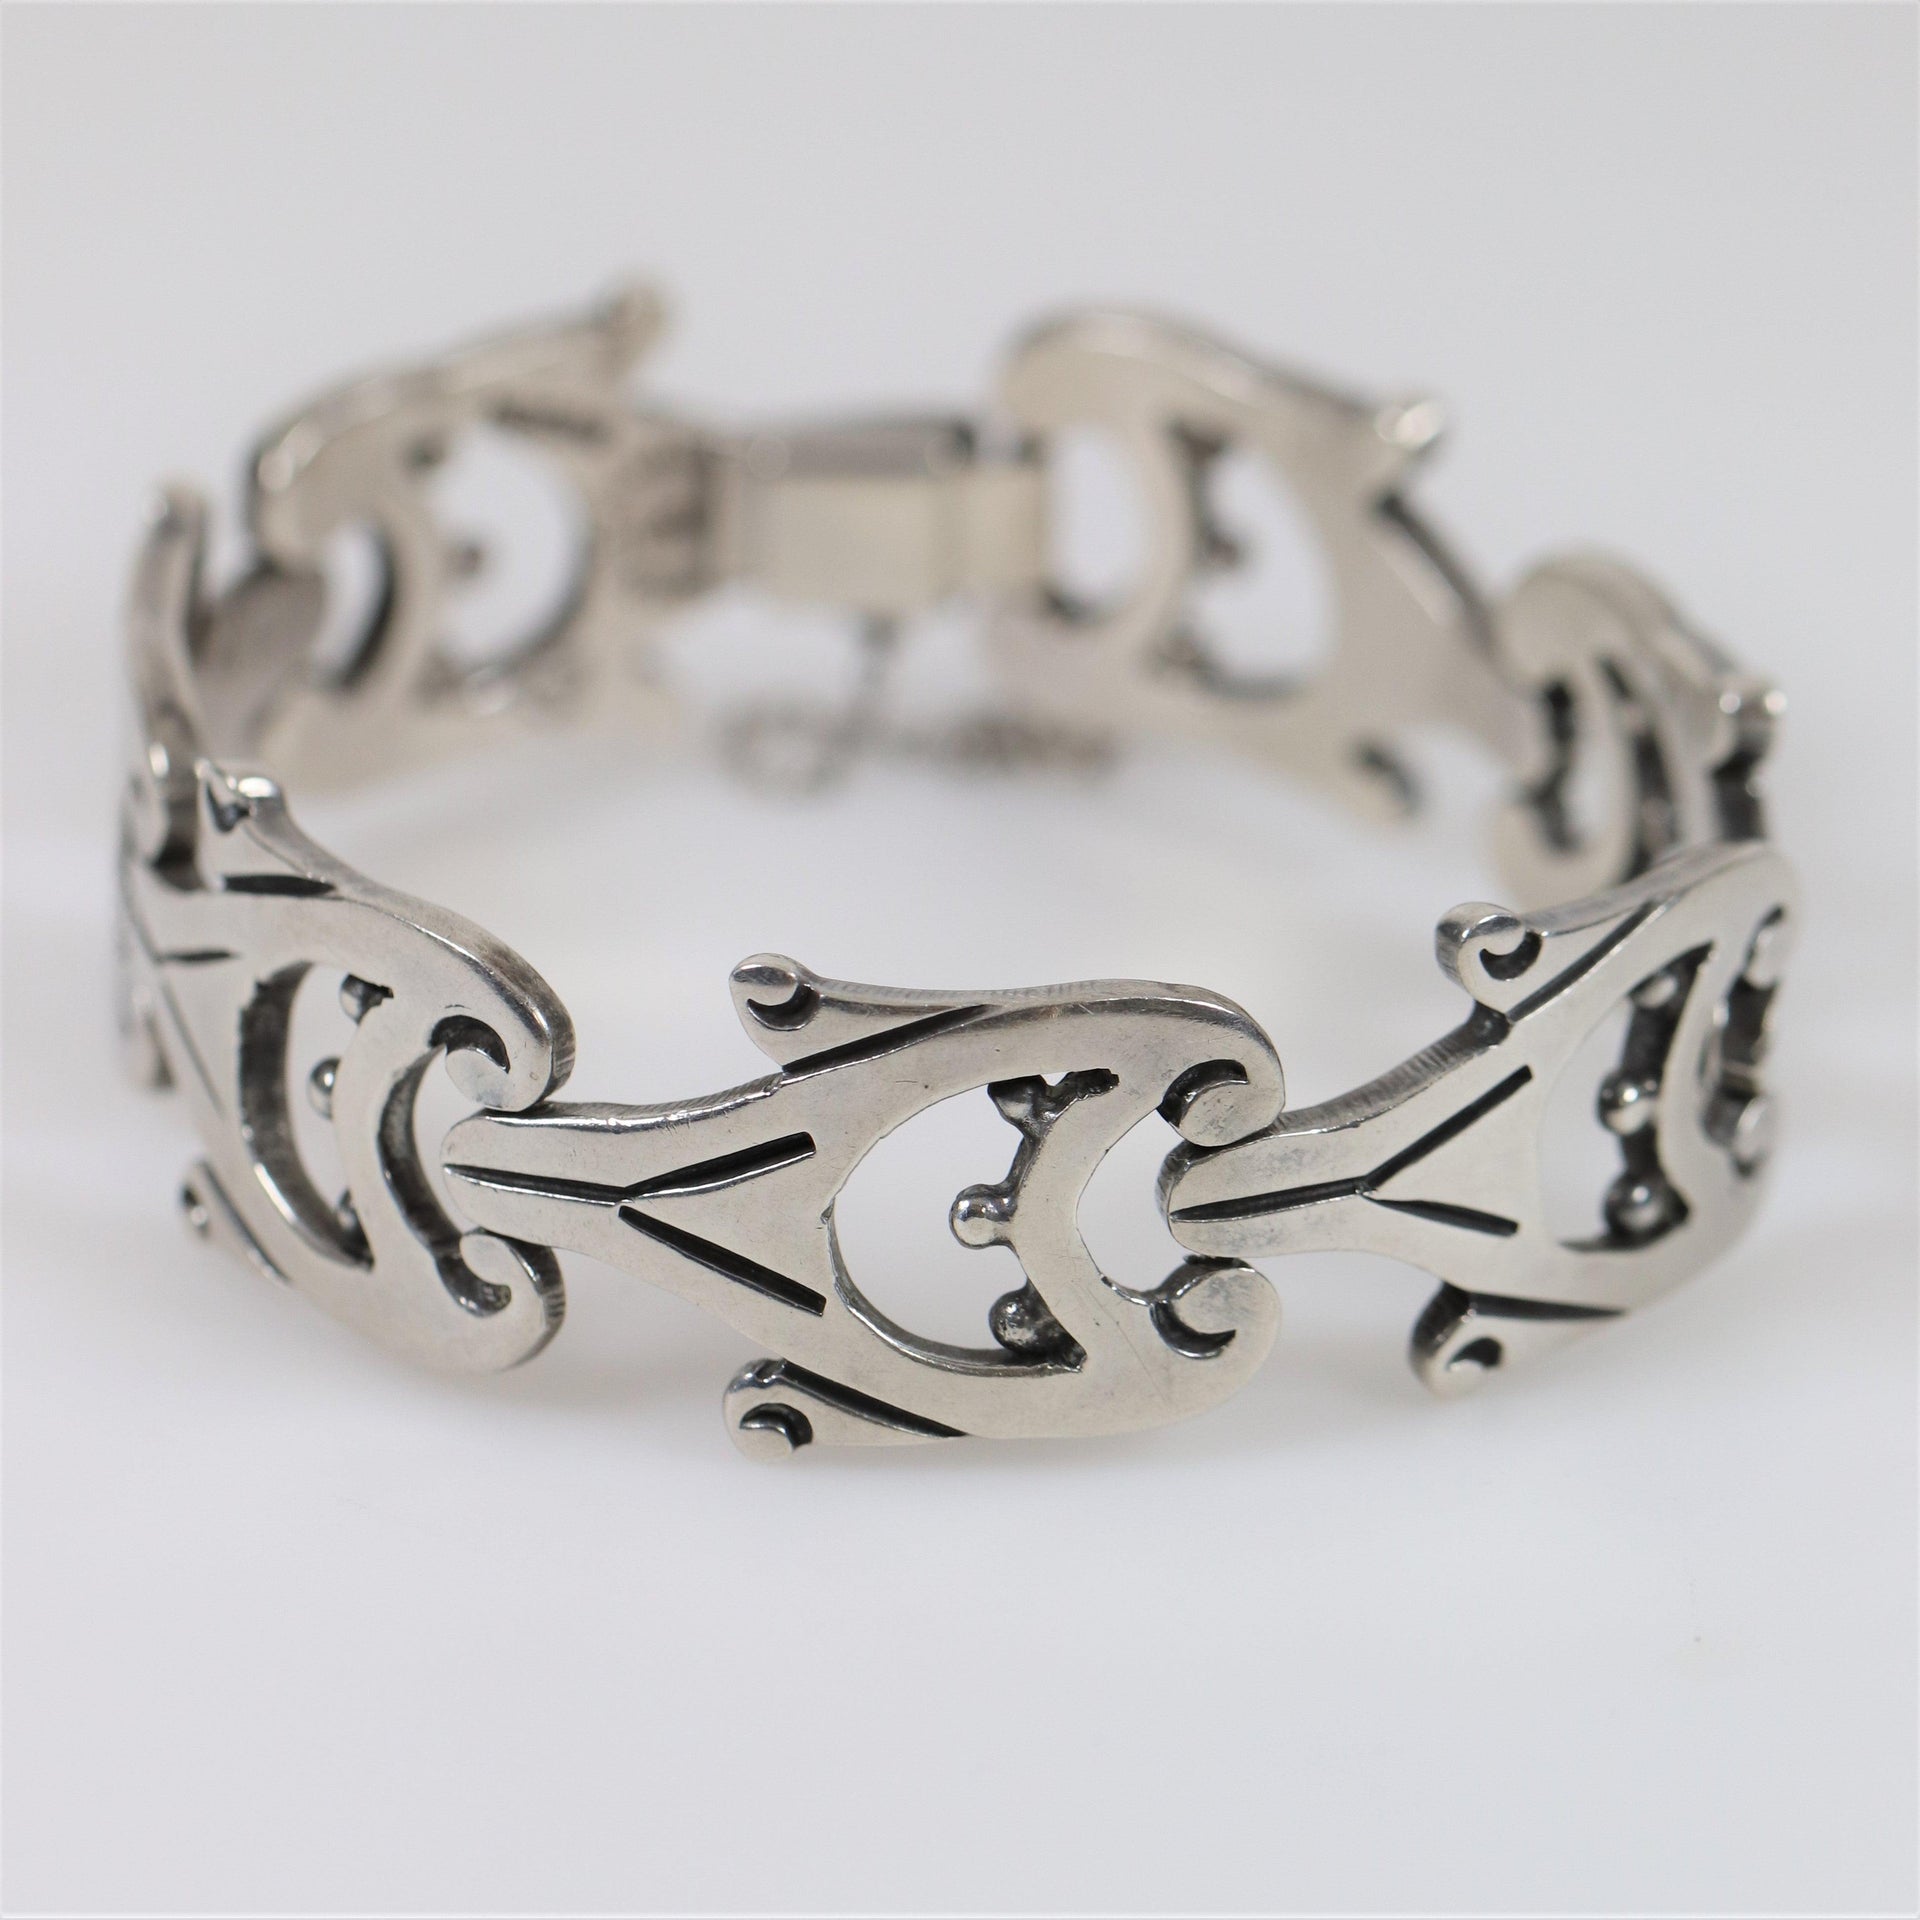 Silver Star Charm Bracelet from Taxco, Mexico – JJ Caprices